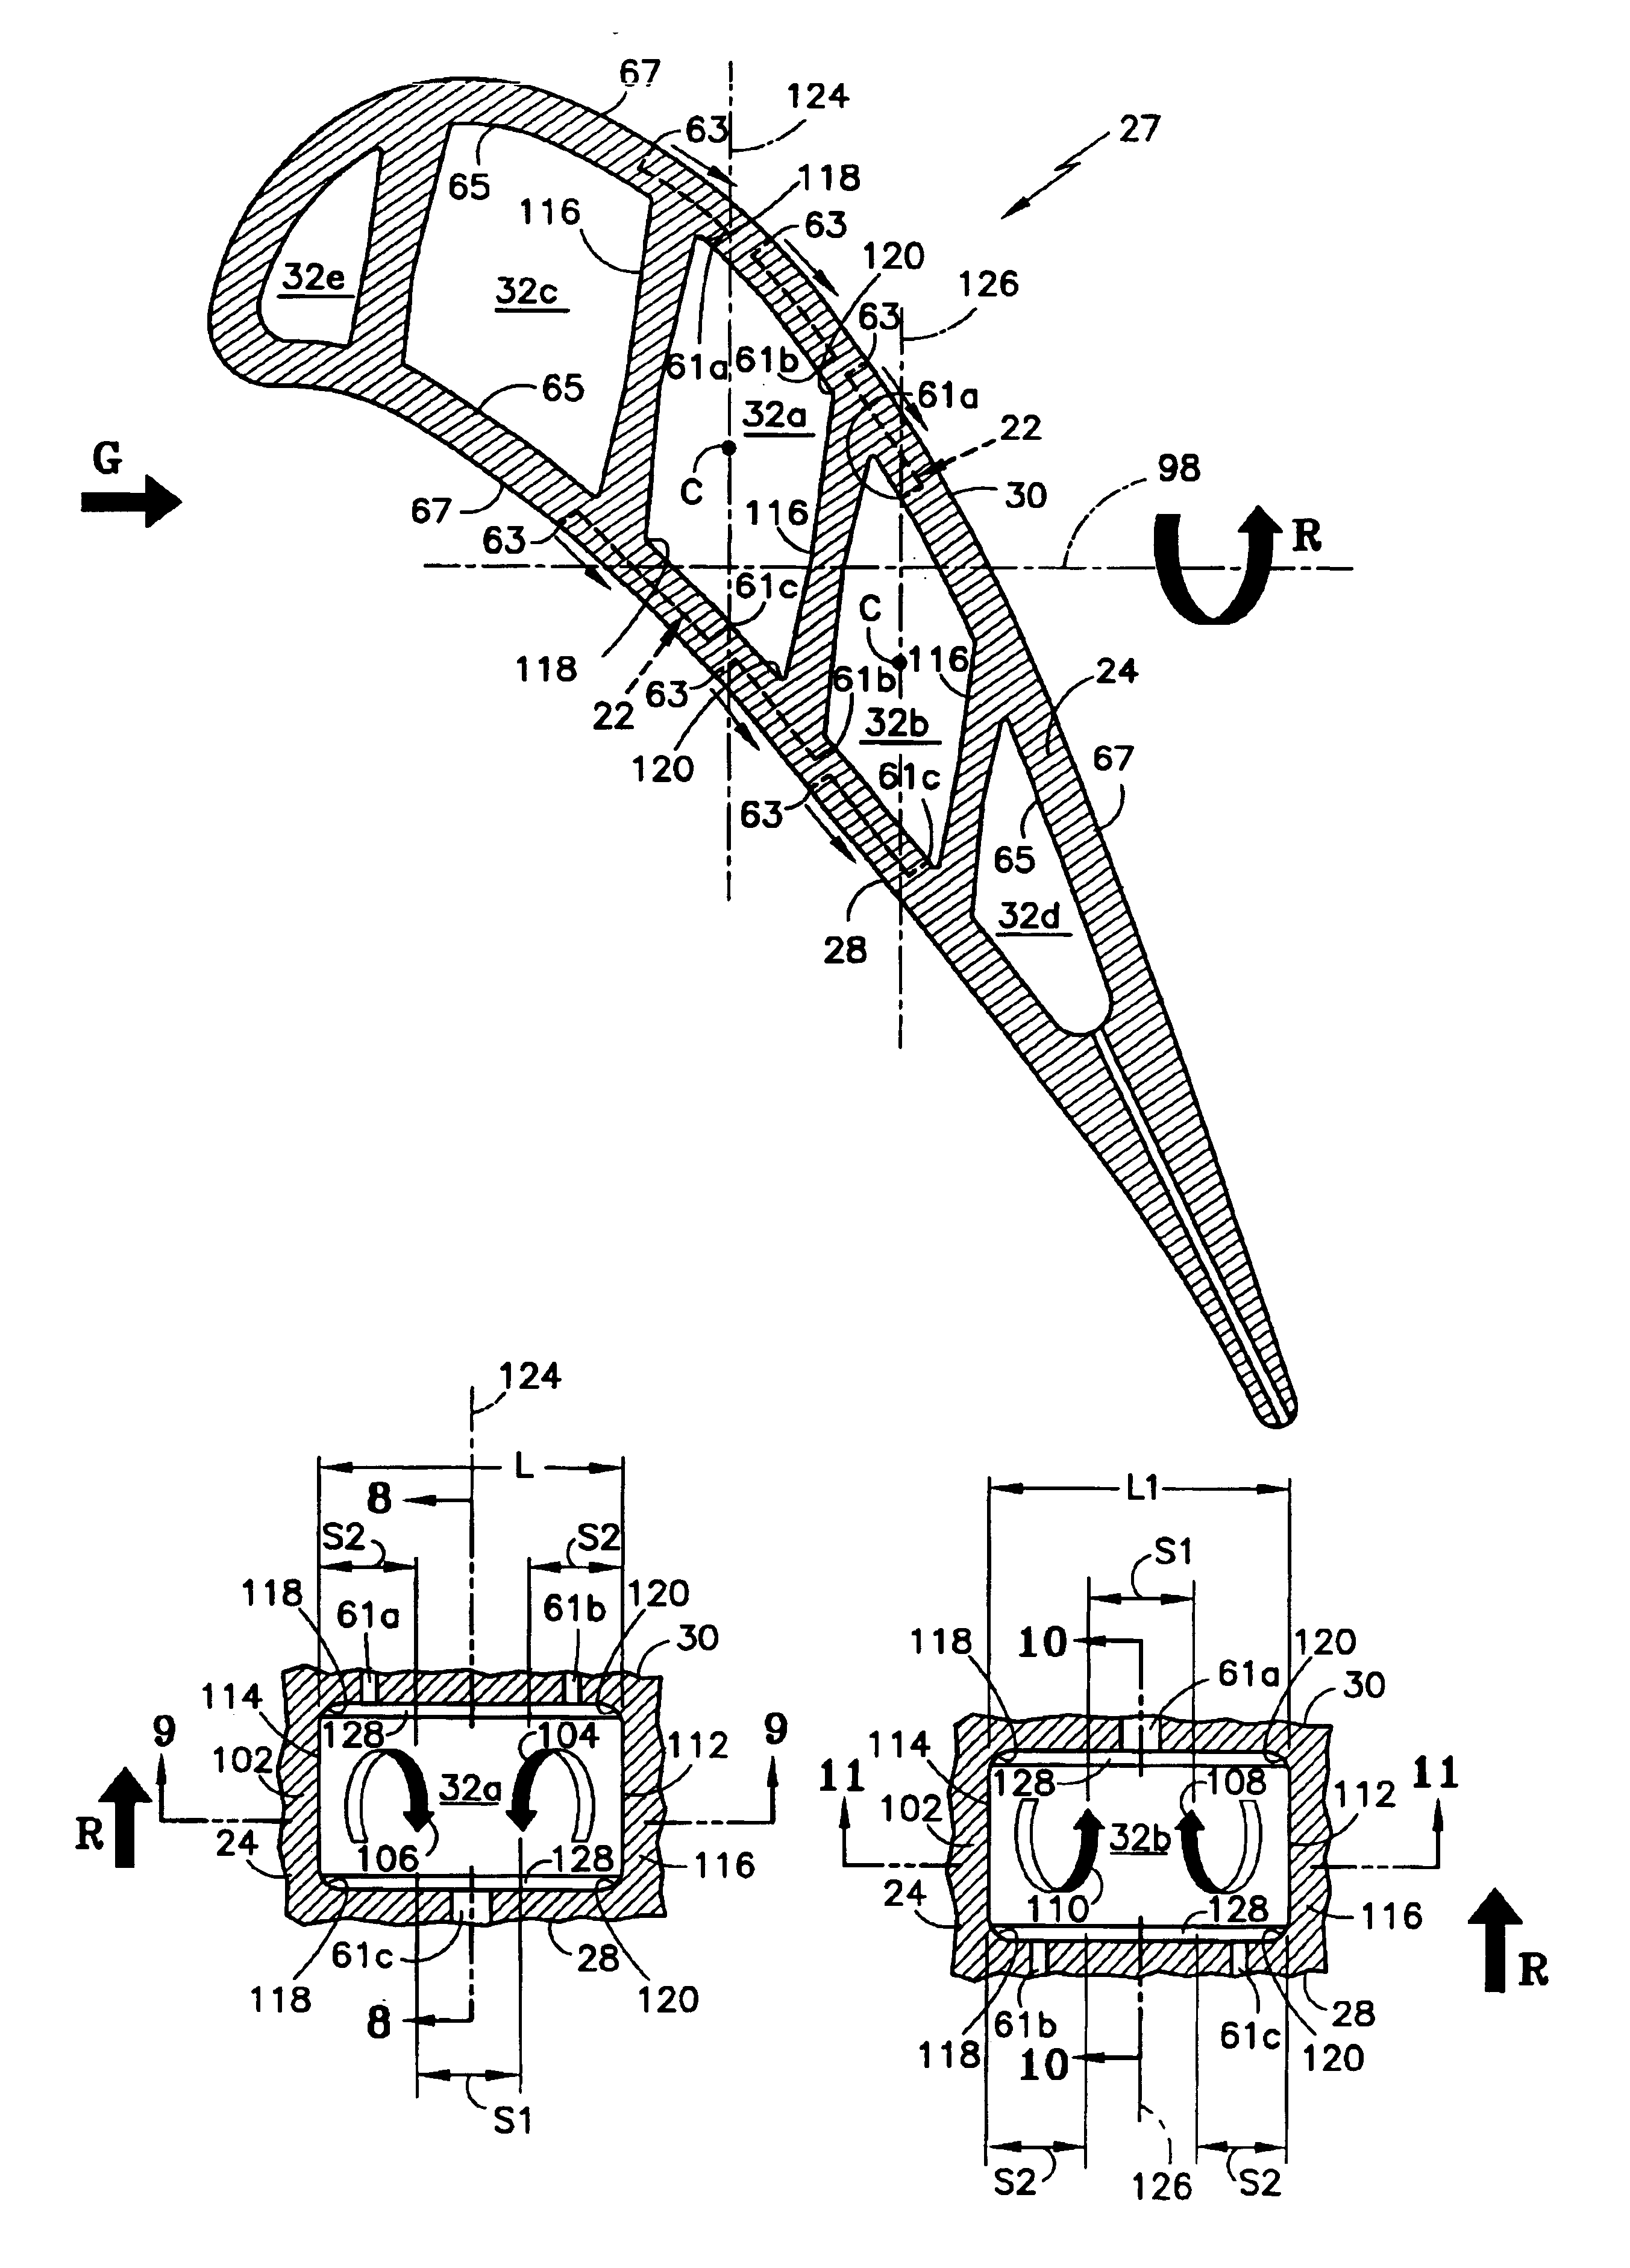 Microcircuit cooling for a turbine blade